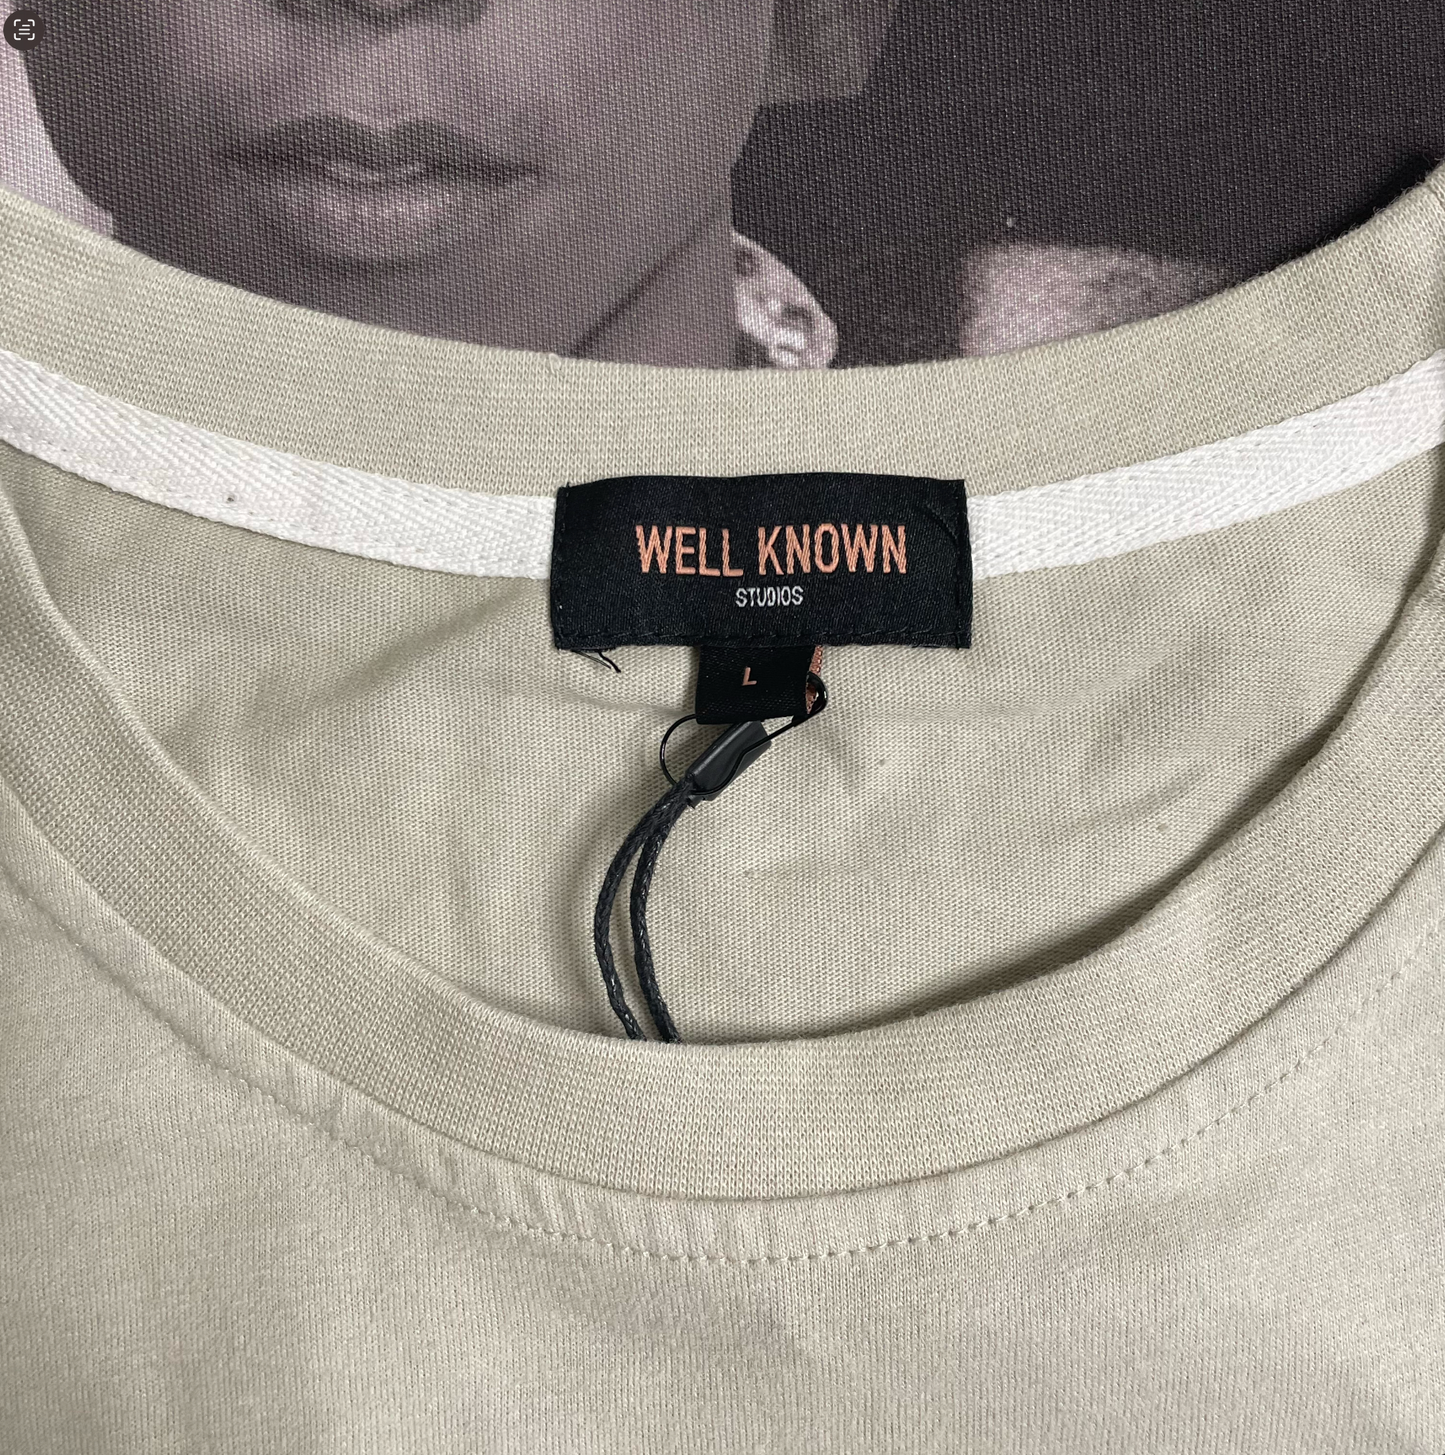 Well Known Studios The Walters (Slick Rick) Tee